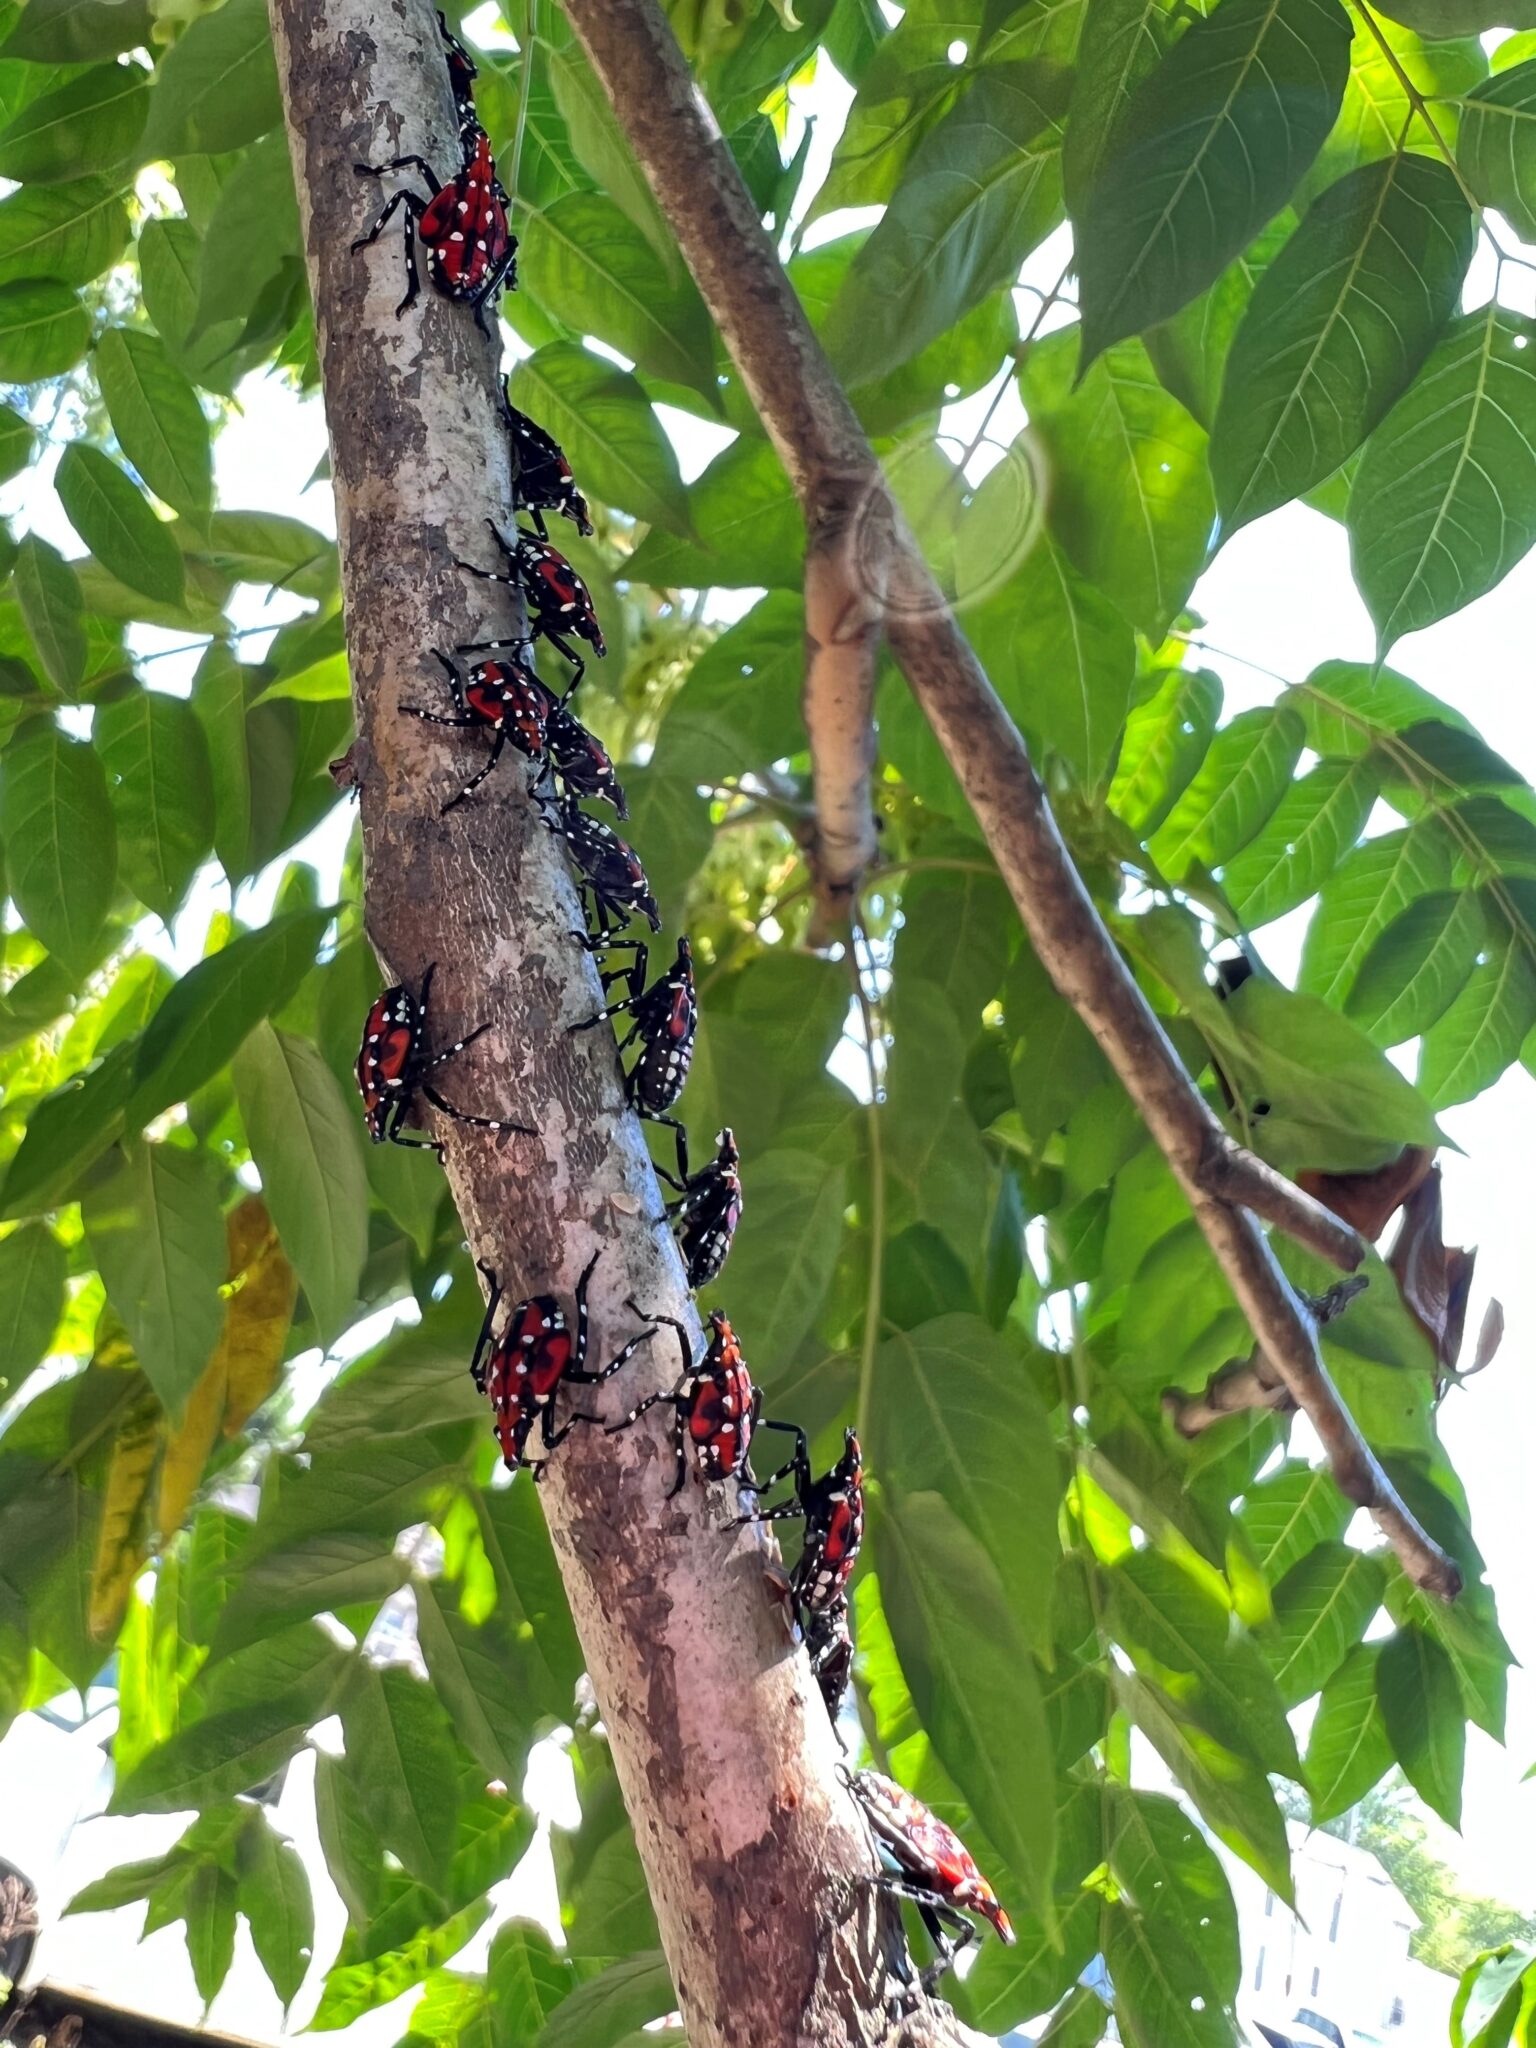 Spotted lanternfly 4th instar nymphs